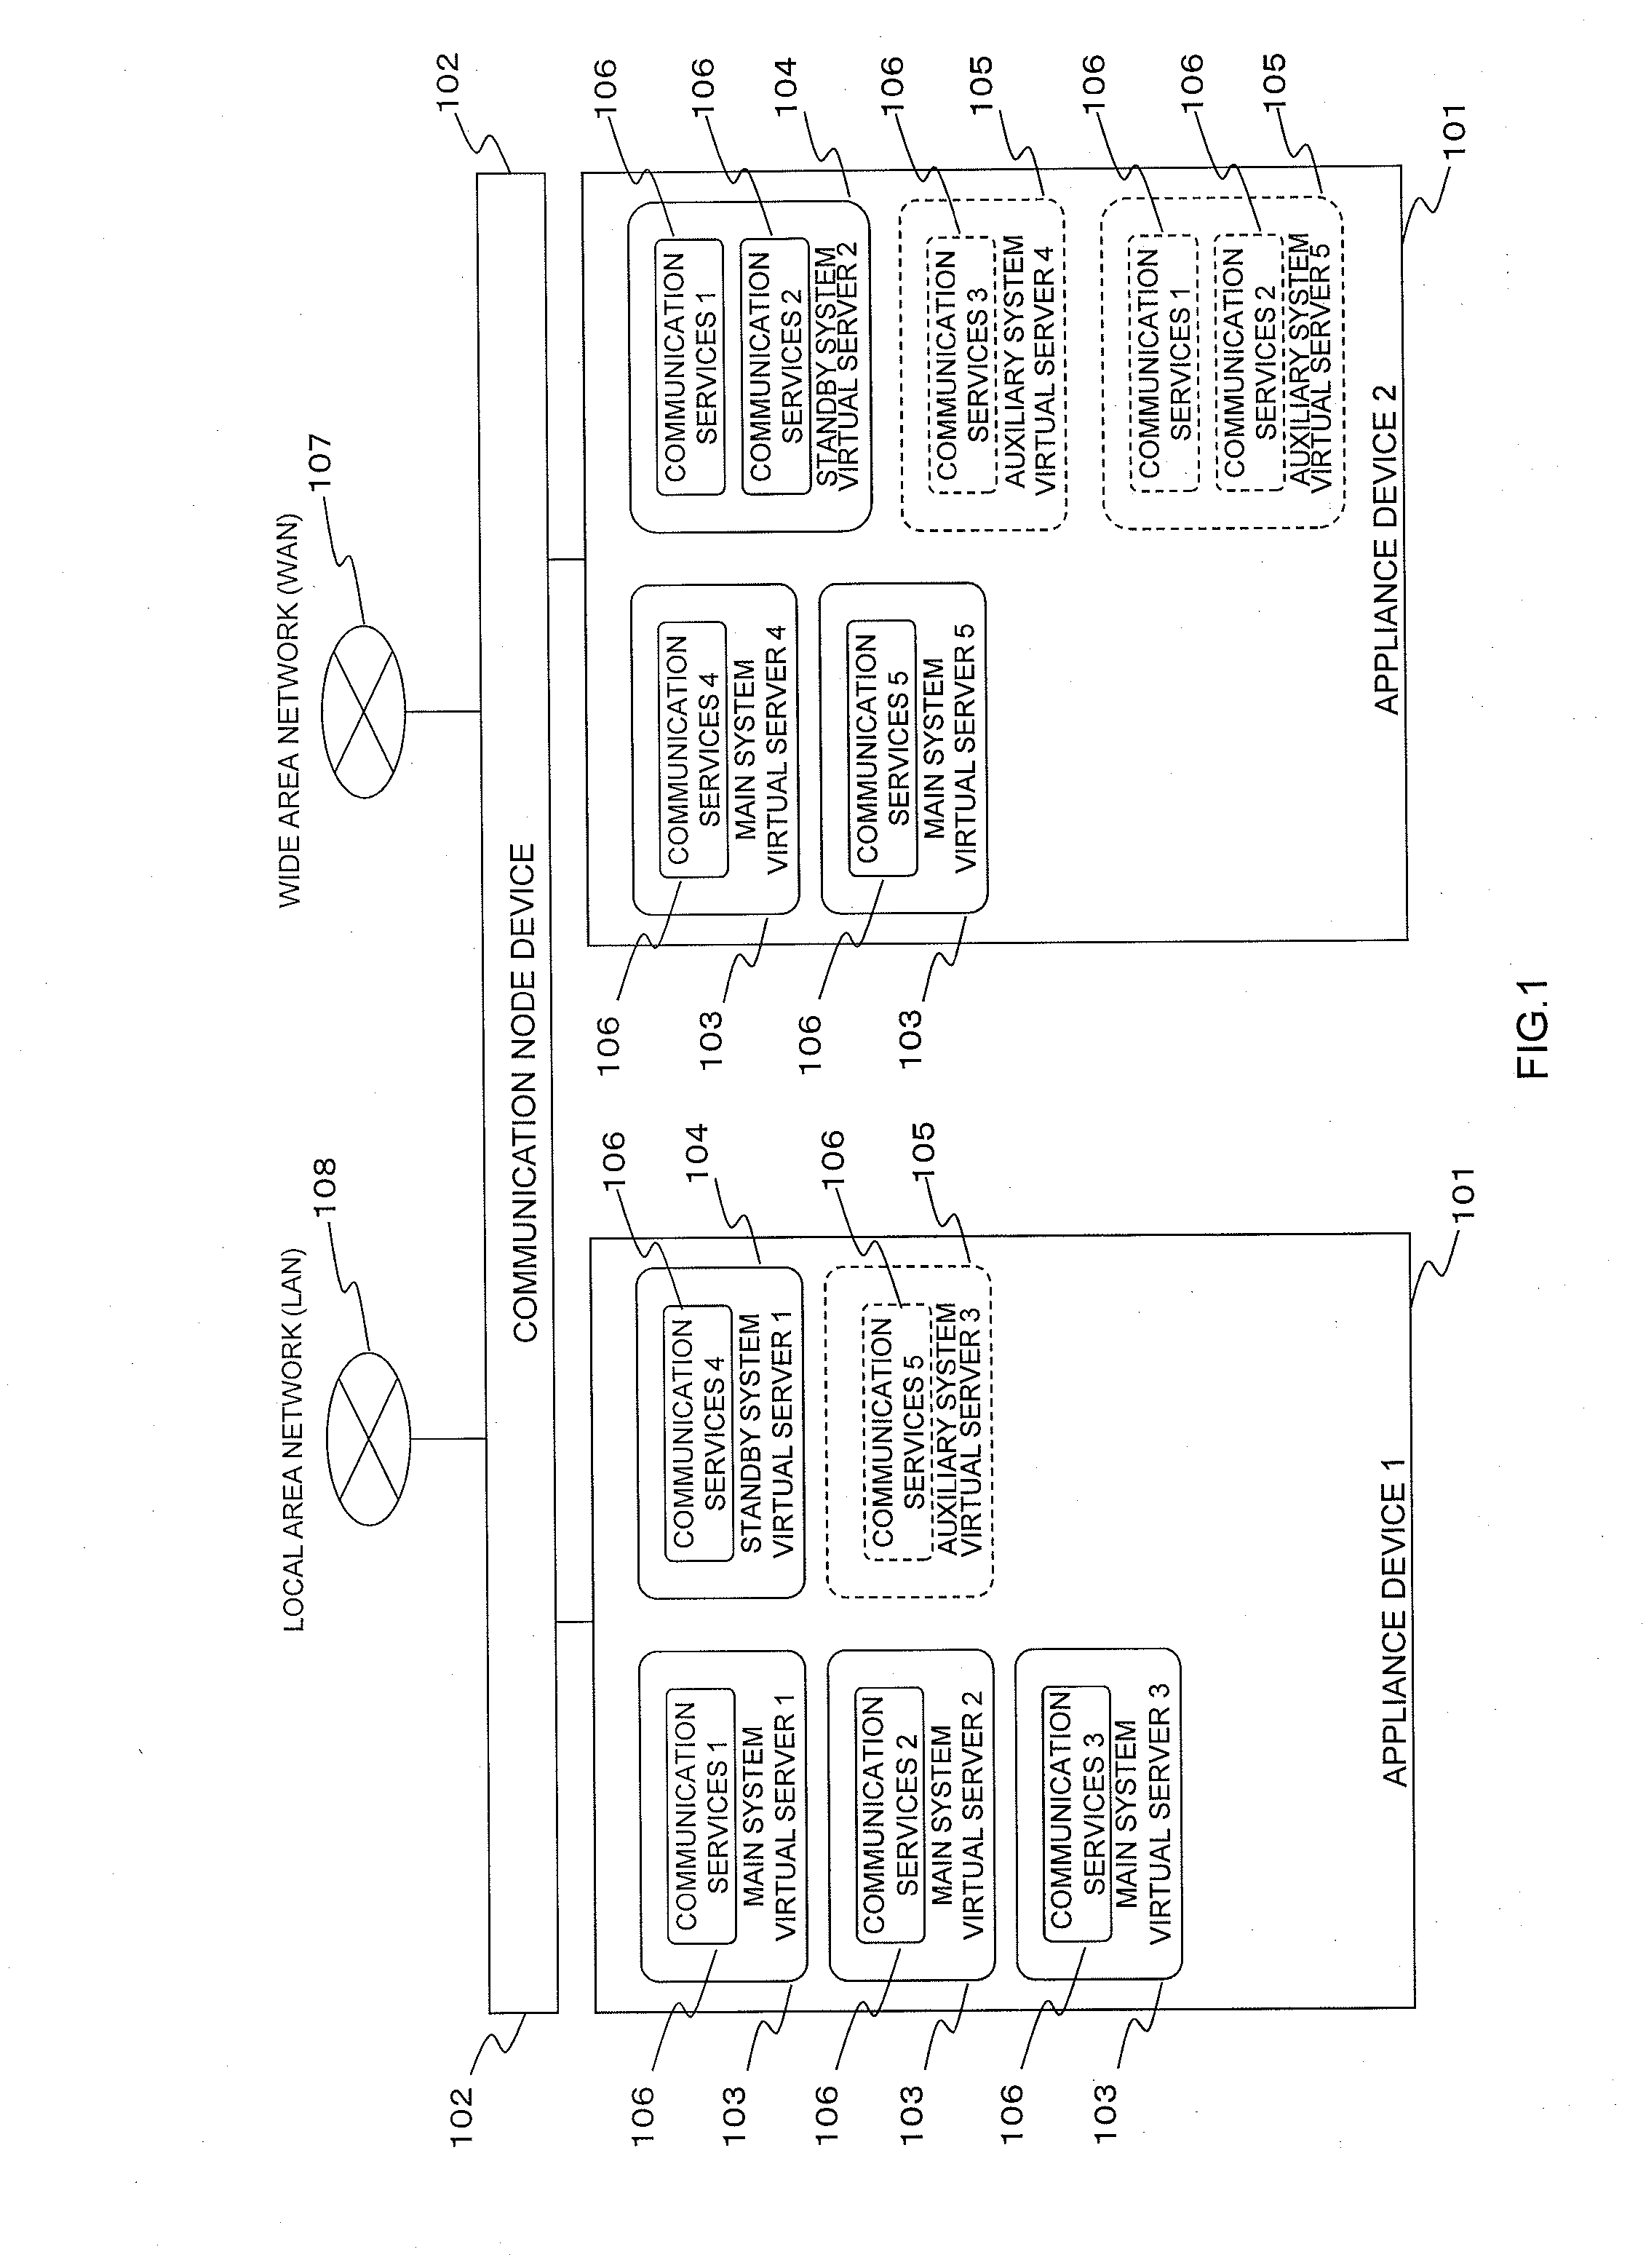 Failure recovery system and method of creating the failure recovery system